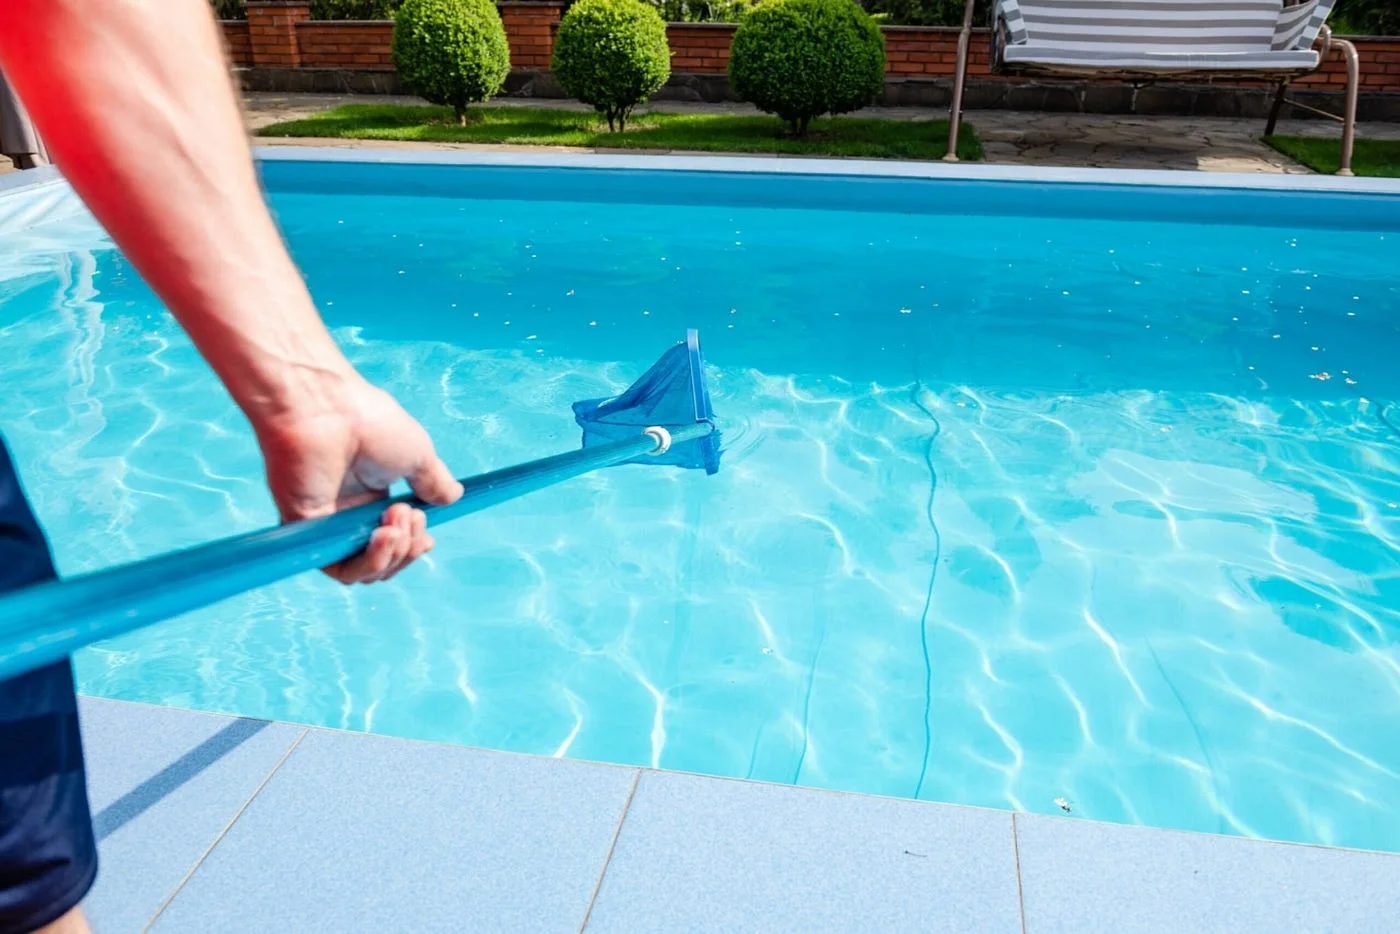 Maintenance and Cleaning Tips for Swimming Pool Tiles